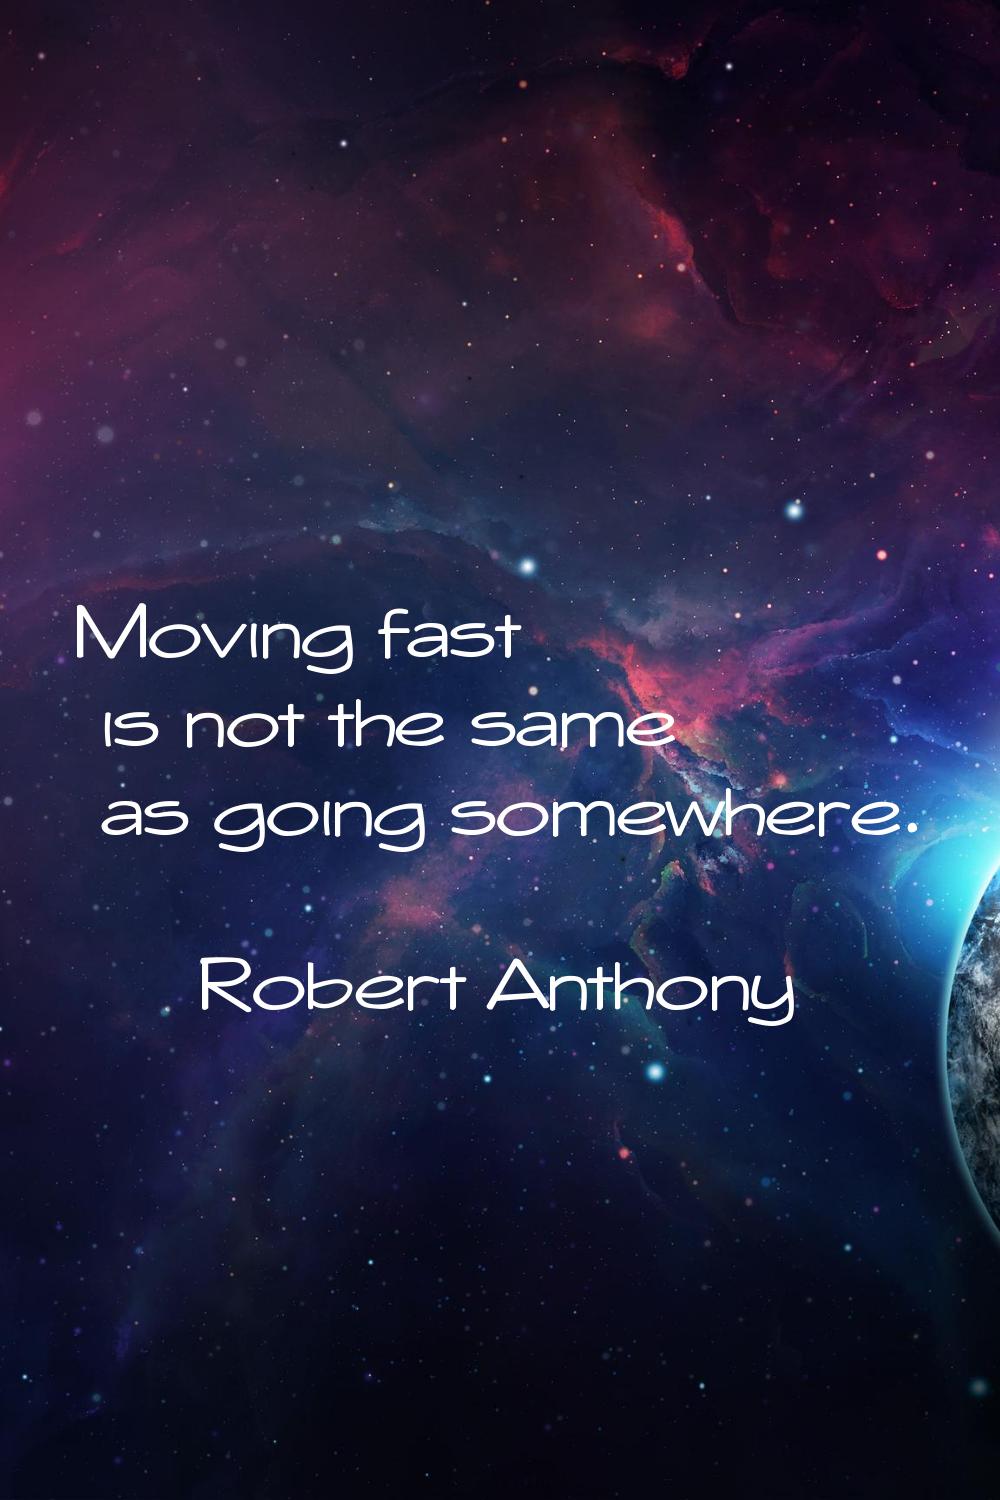 Moving fast is not the same as going somewhere.